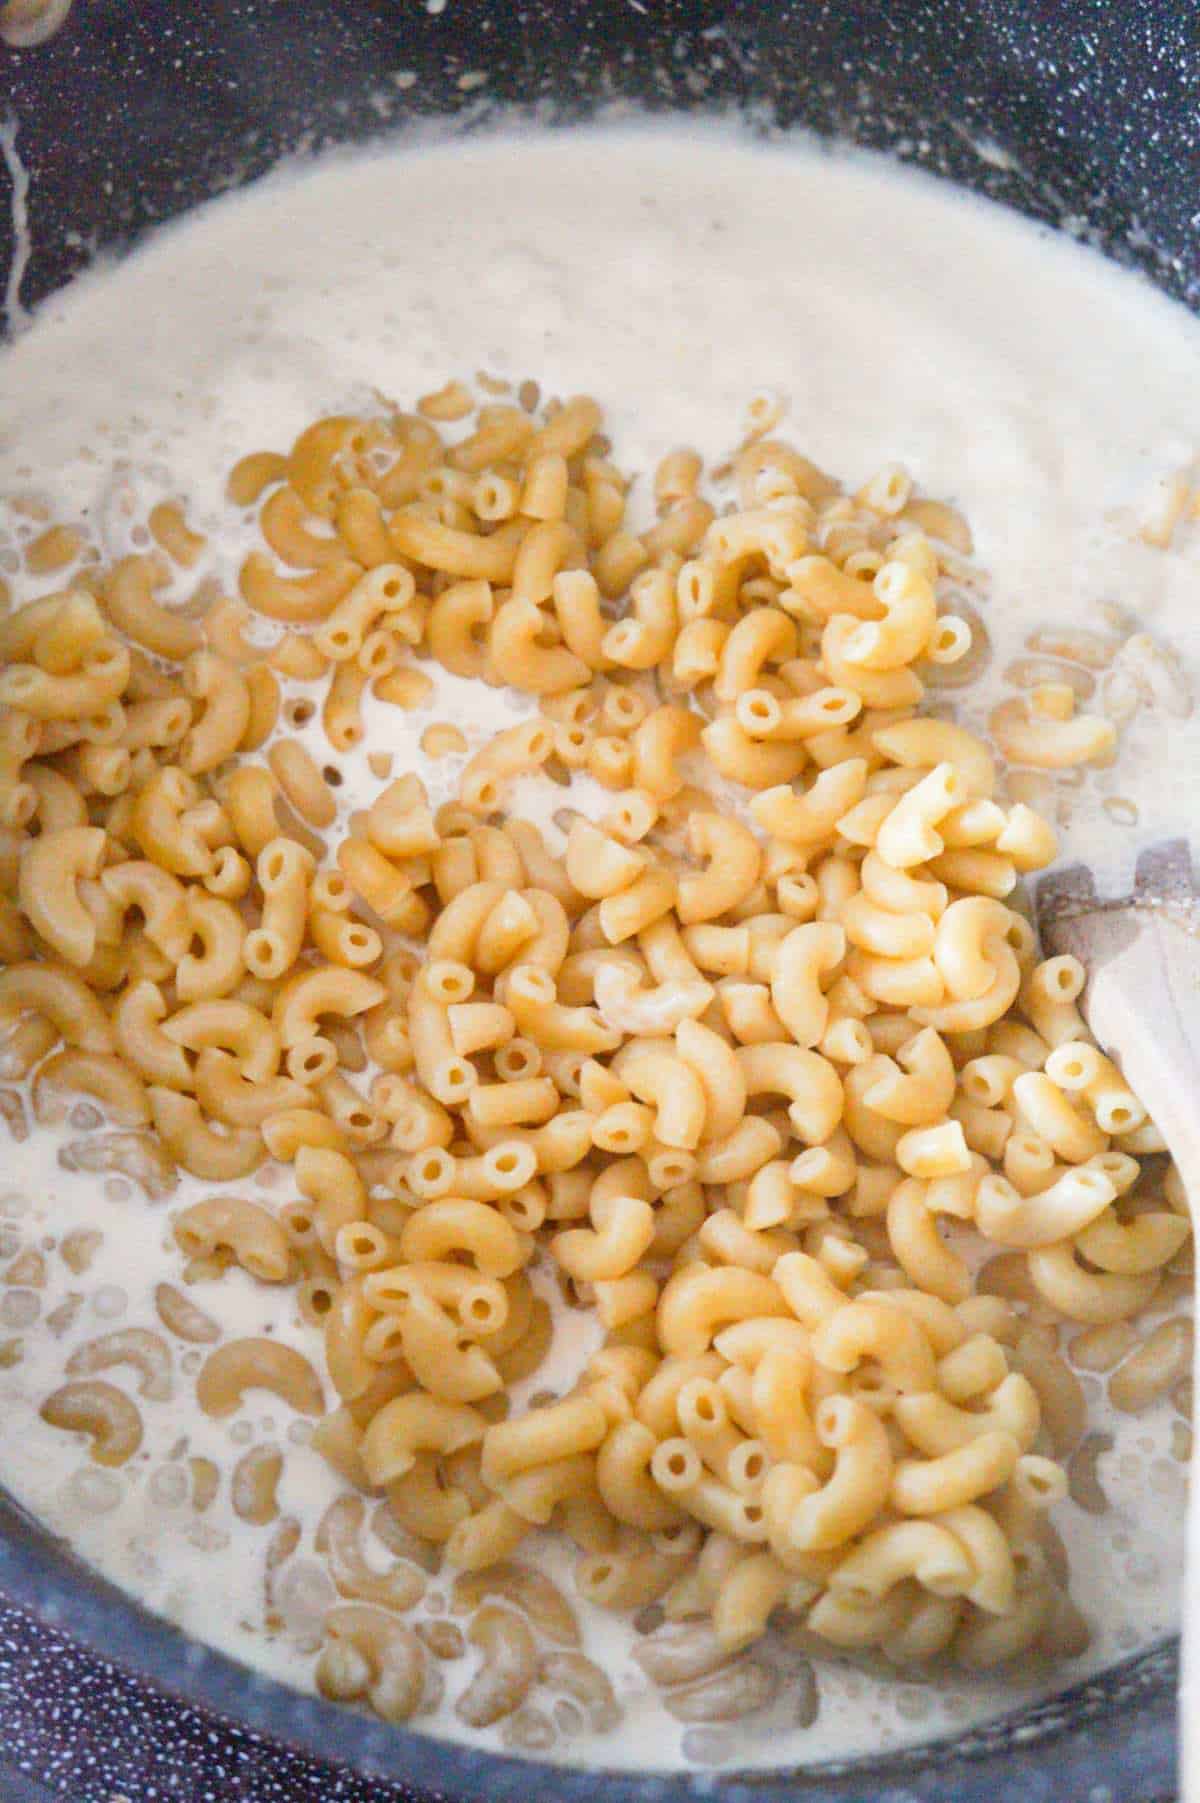 cooked macaroni noodles on top of creamy sauce in a large pot